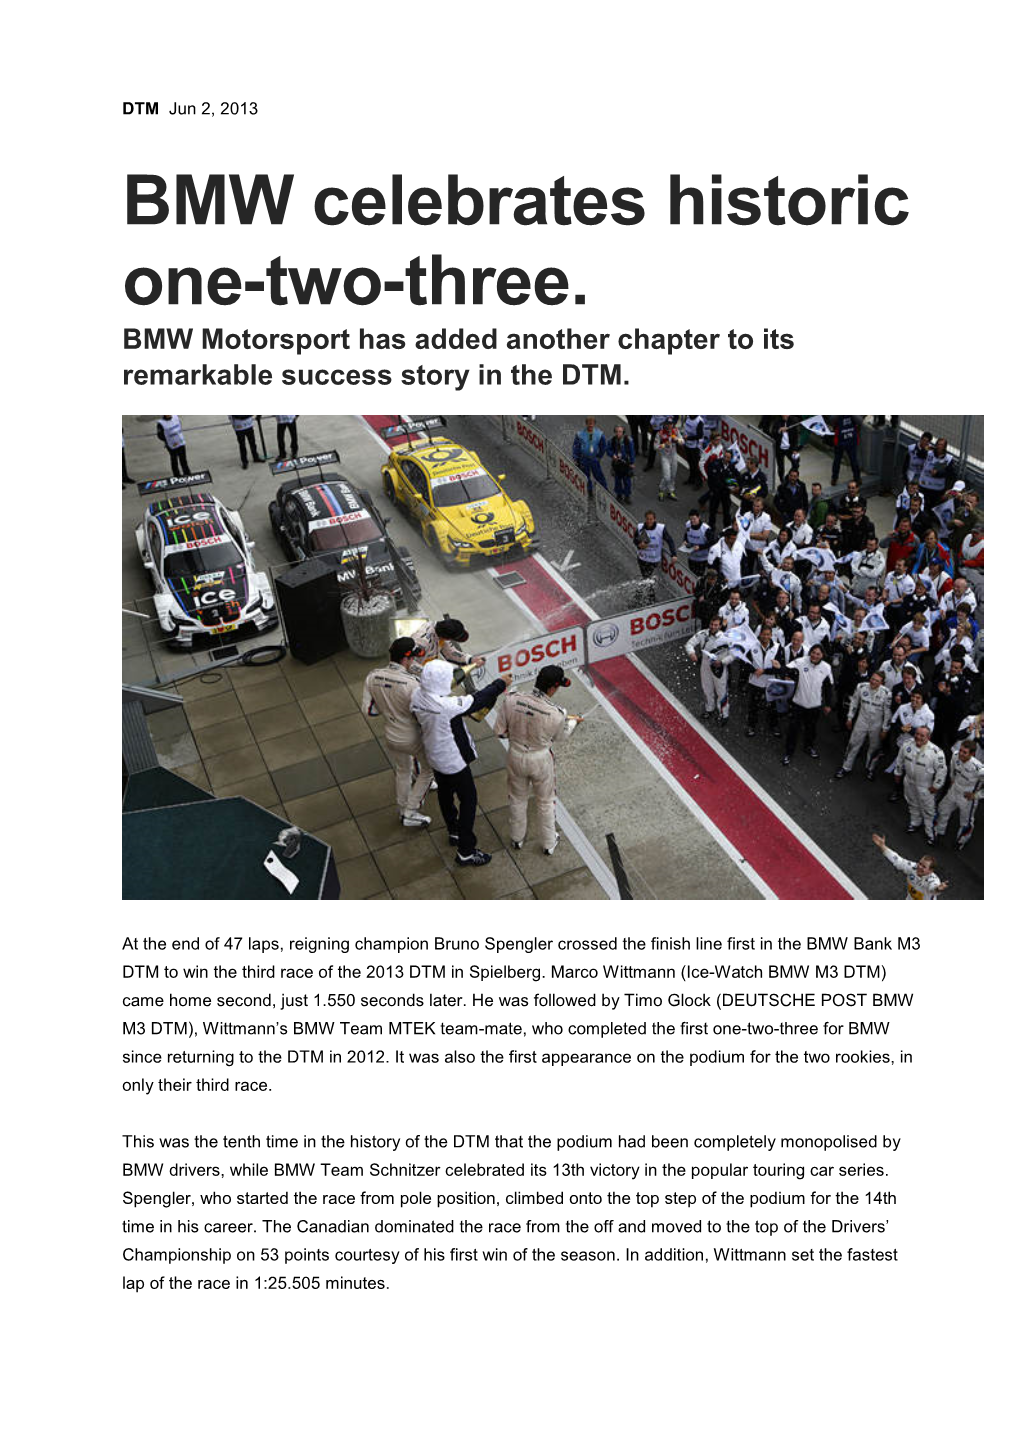 BMW Celebrates Historic One-Two-Three. BMW Motorsport Has Added Another Chapter to Its Remarkable Success Story in the DTM